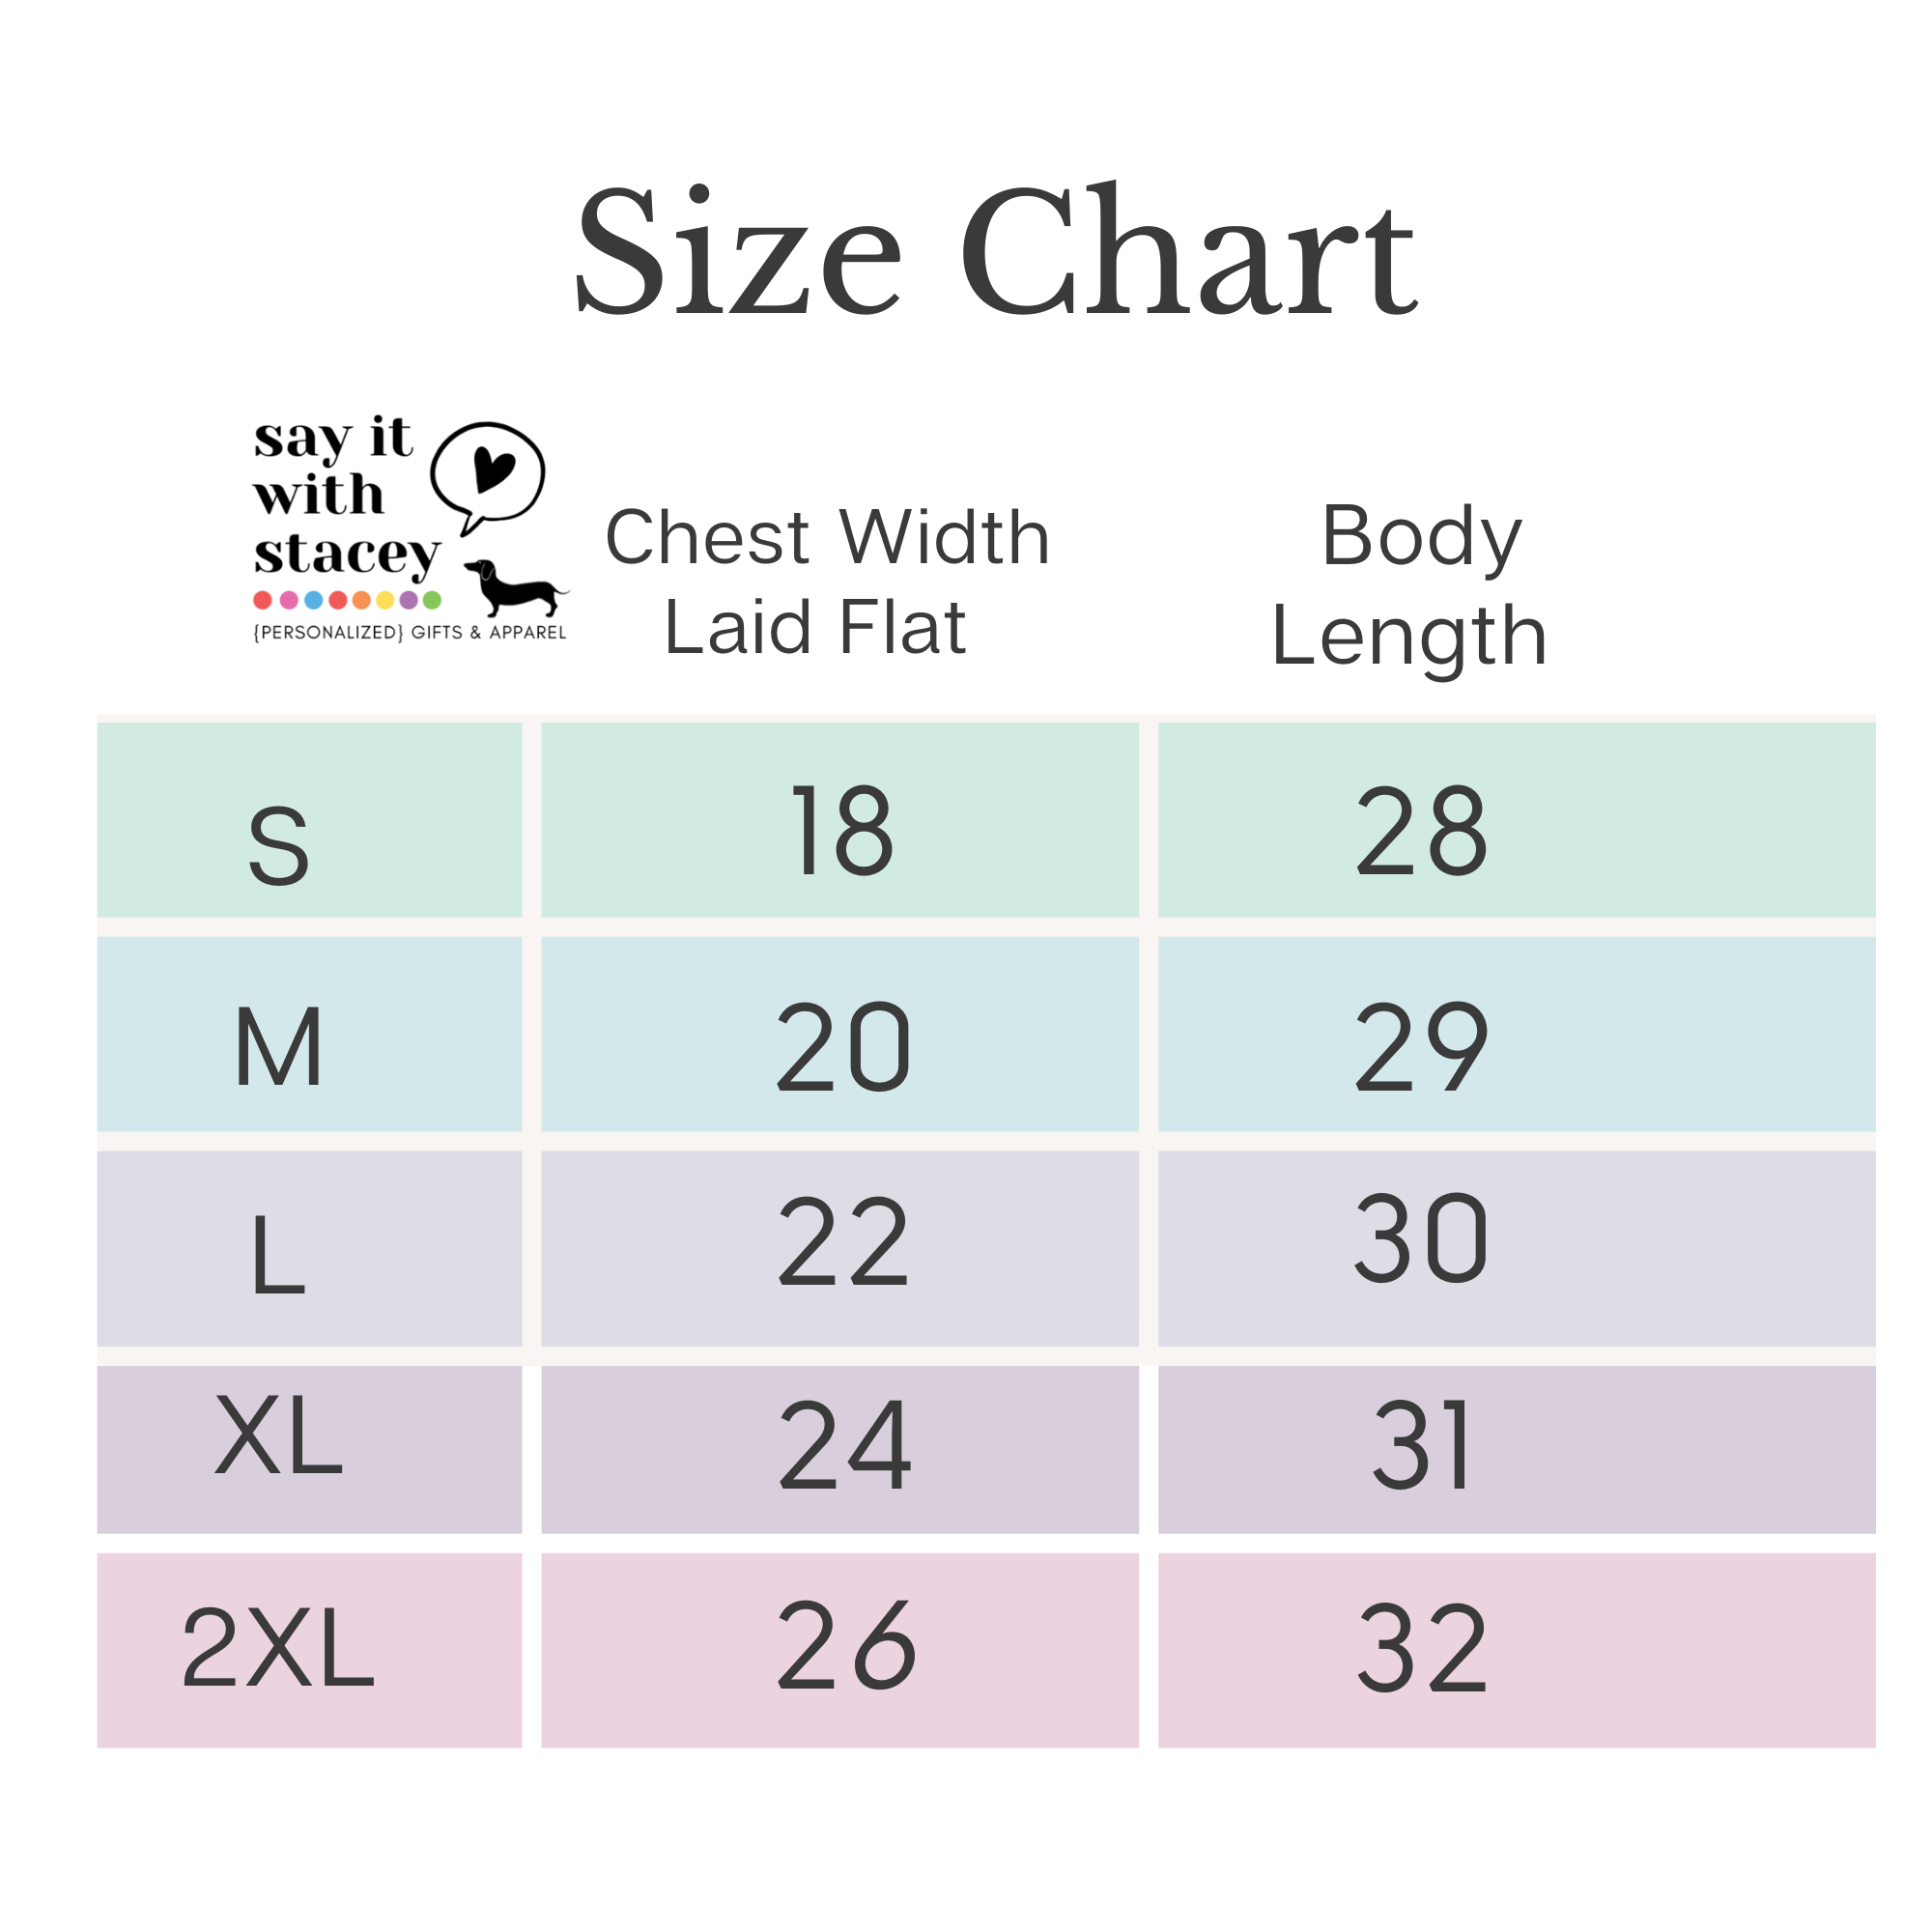 Say it with Stacey Size Chart